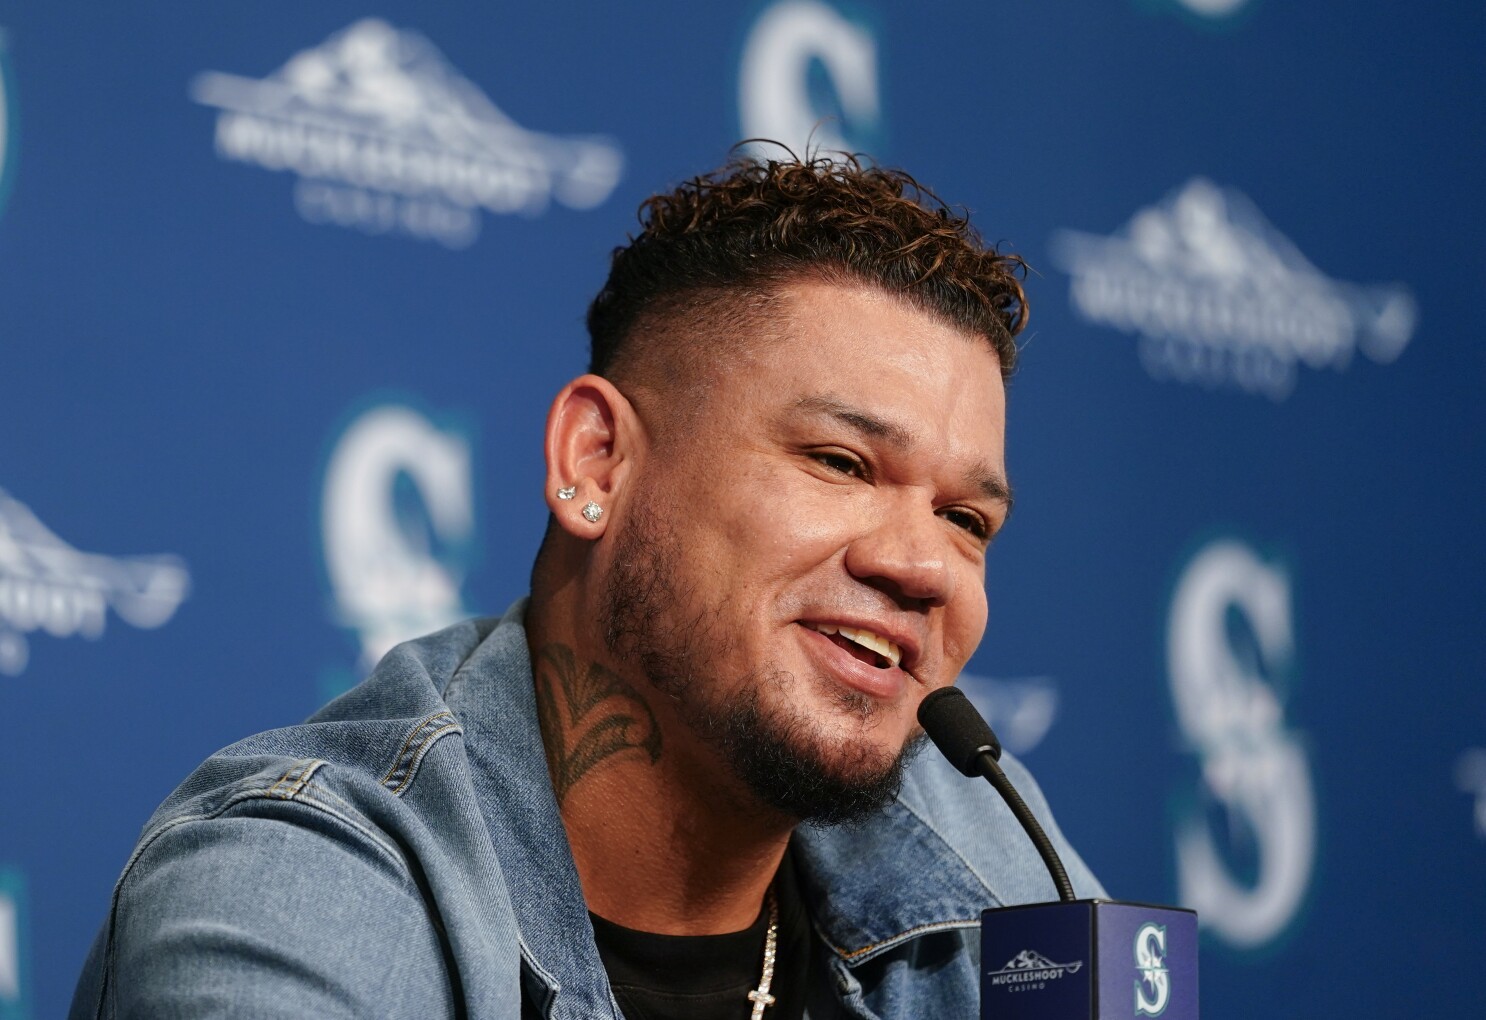 When Felix Hernandez is inducted into Mariners Hall of Fame, his